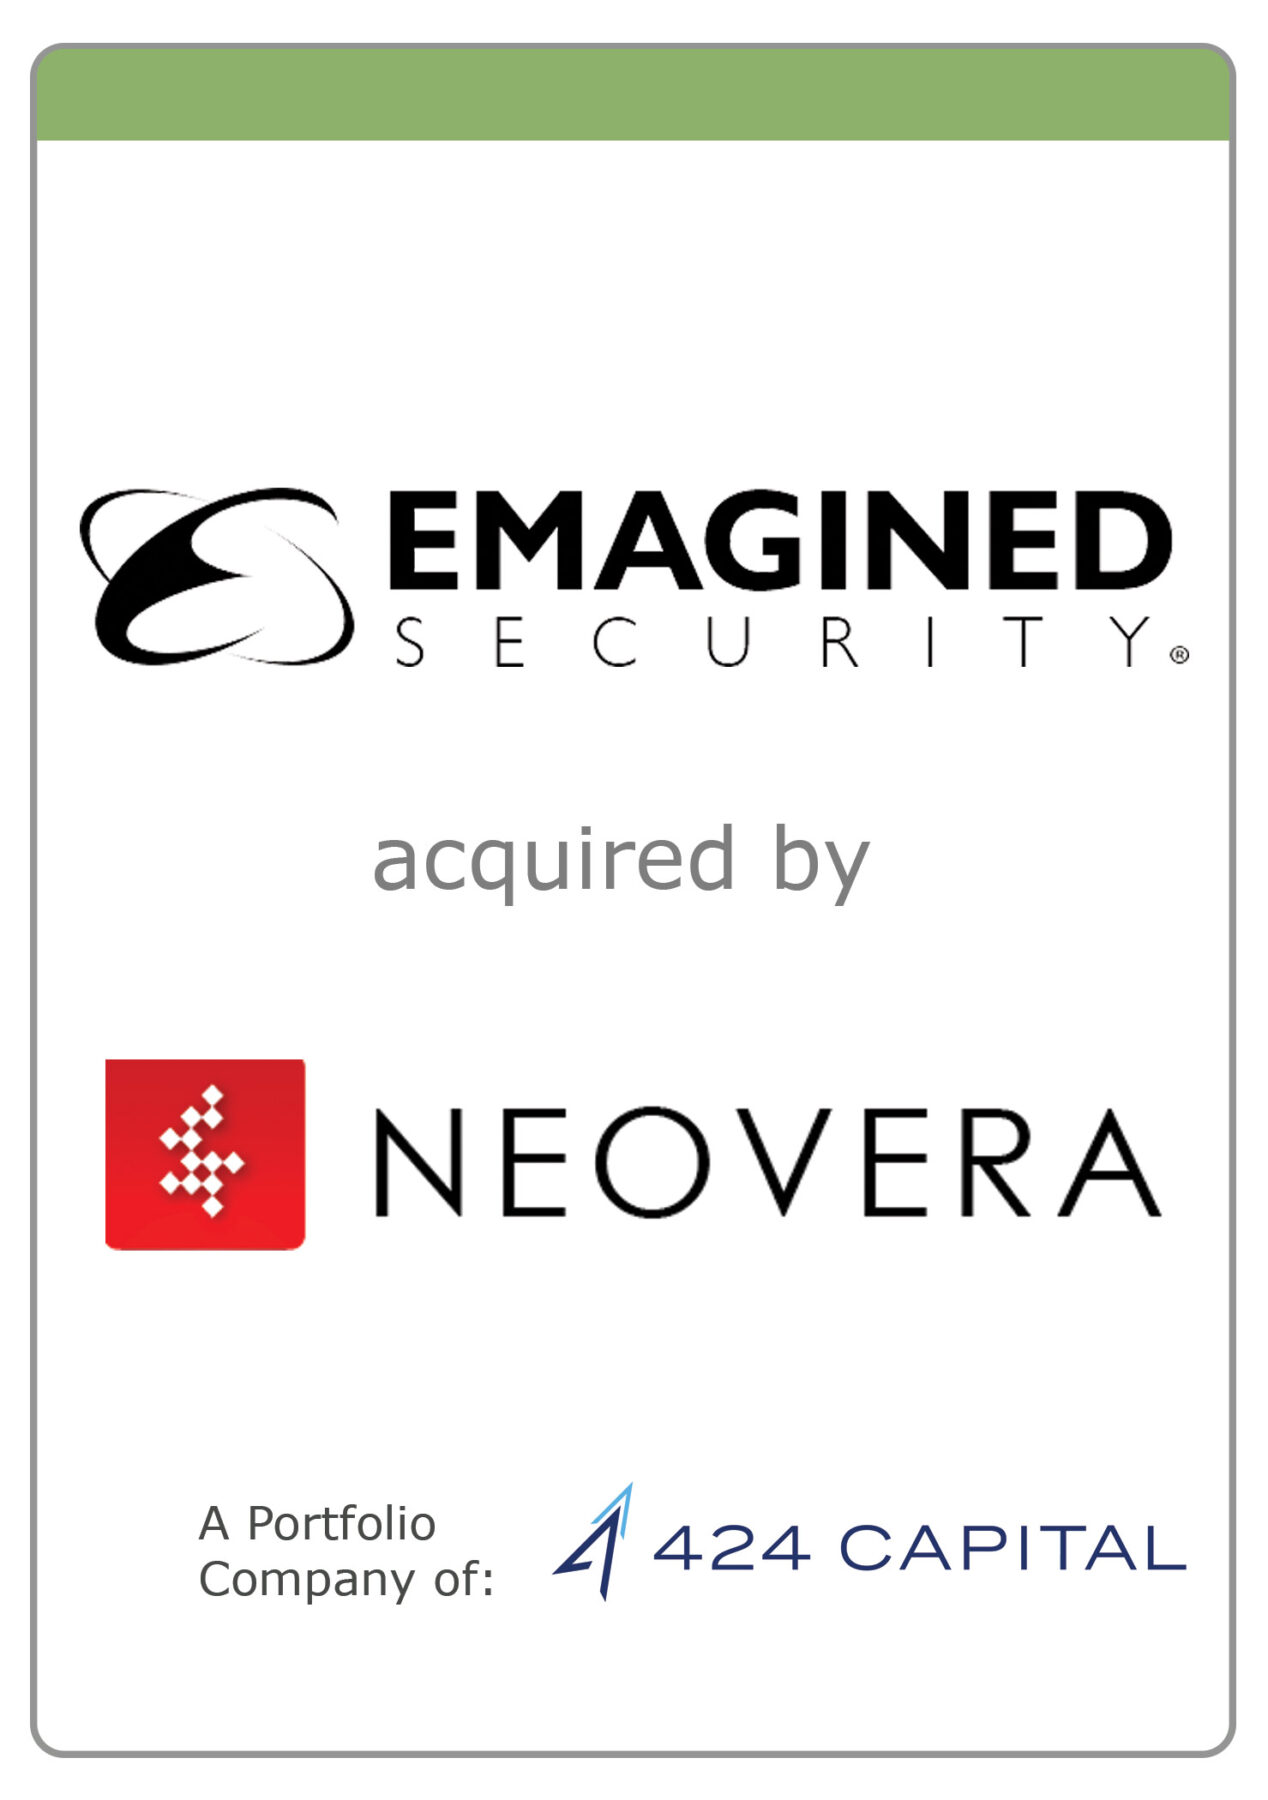 The McLean Group advised Emagined Security on its recent acquisition by Neovera, a 424 Capital portfolio company [...]